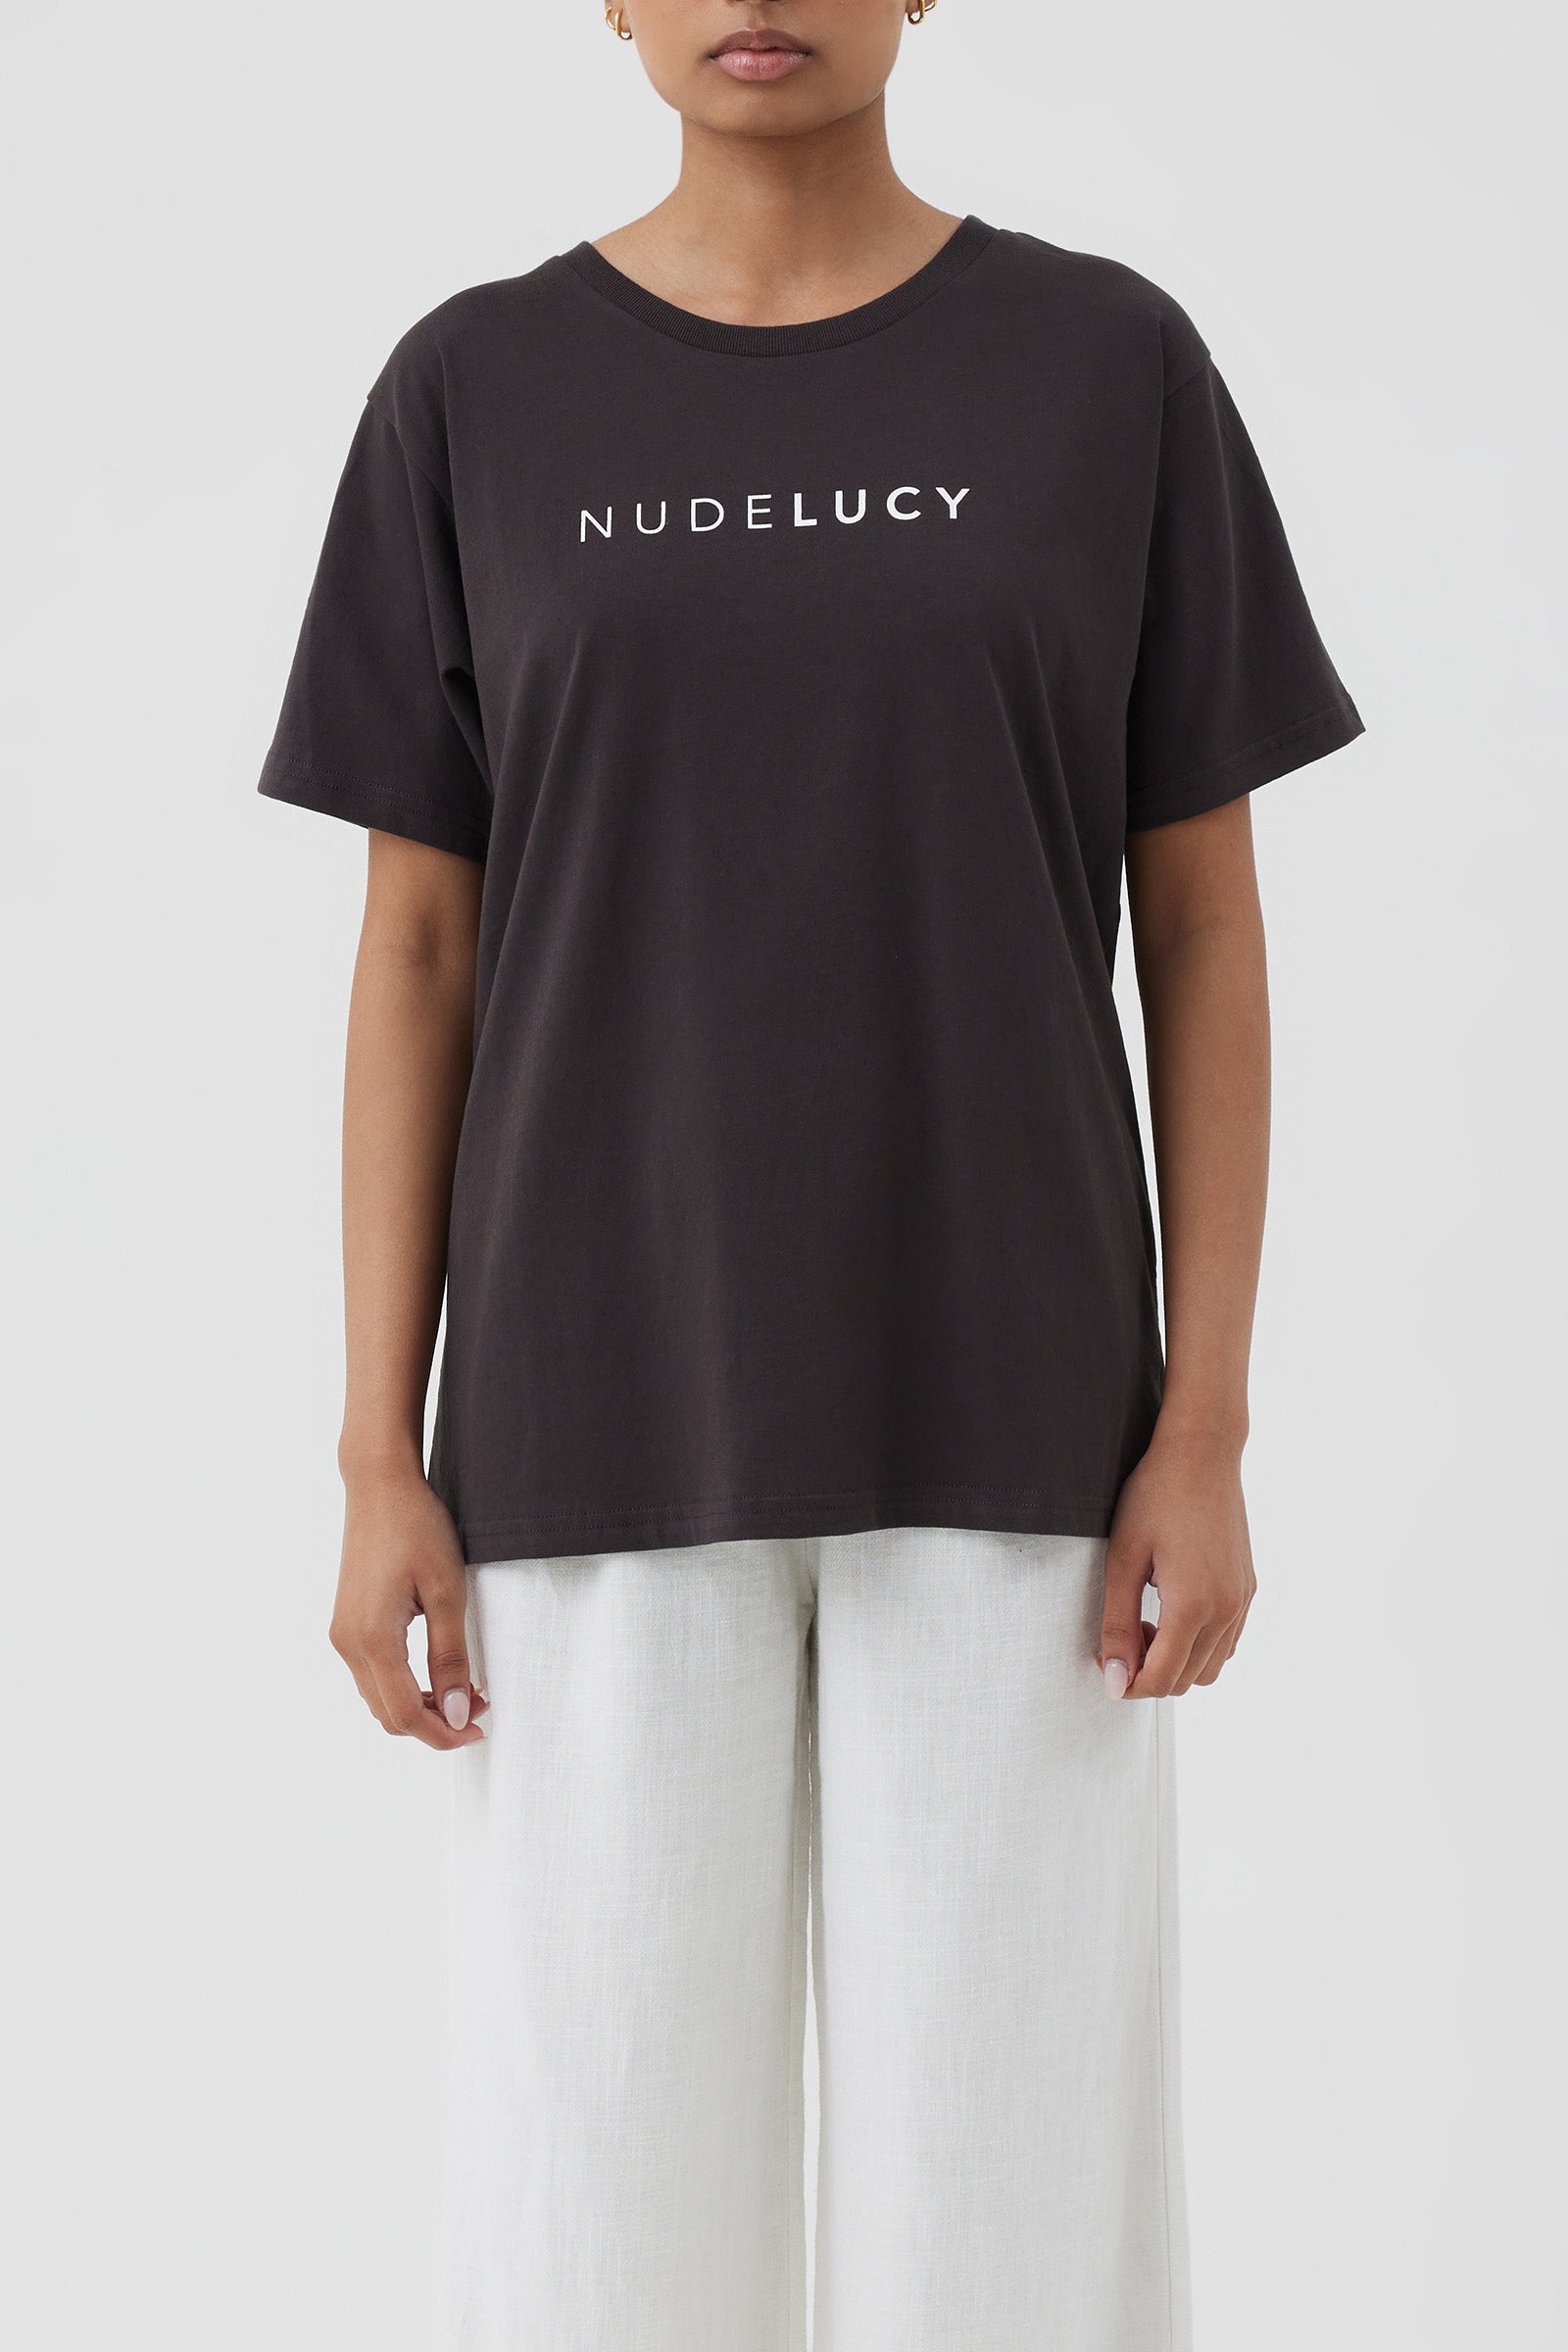 Nude Lucy Nude Lucy Slogan Tee in a Dark Grey In a Brown Coal Colour